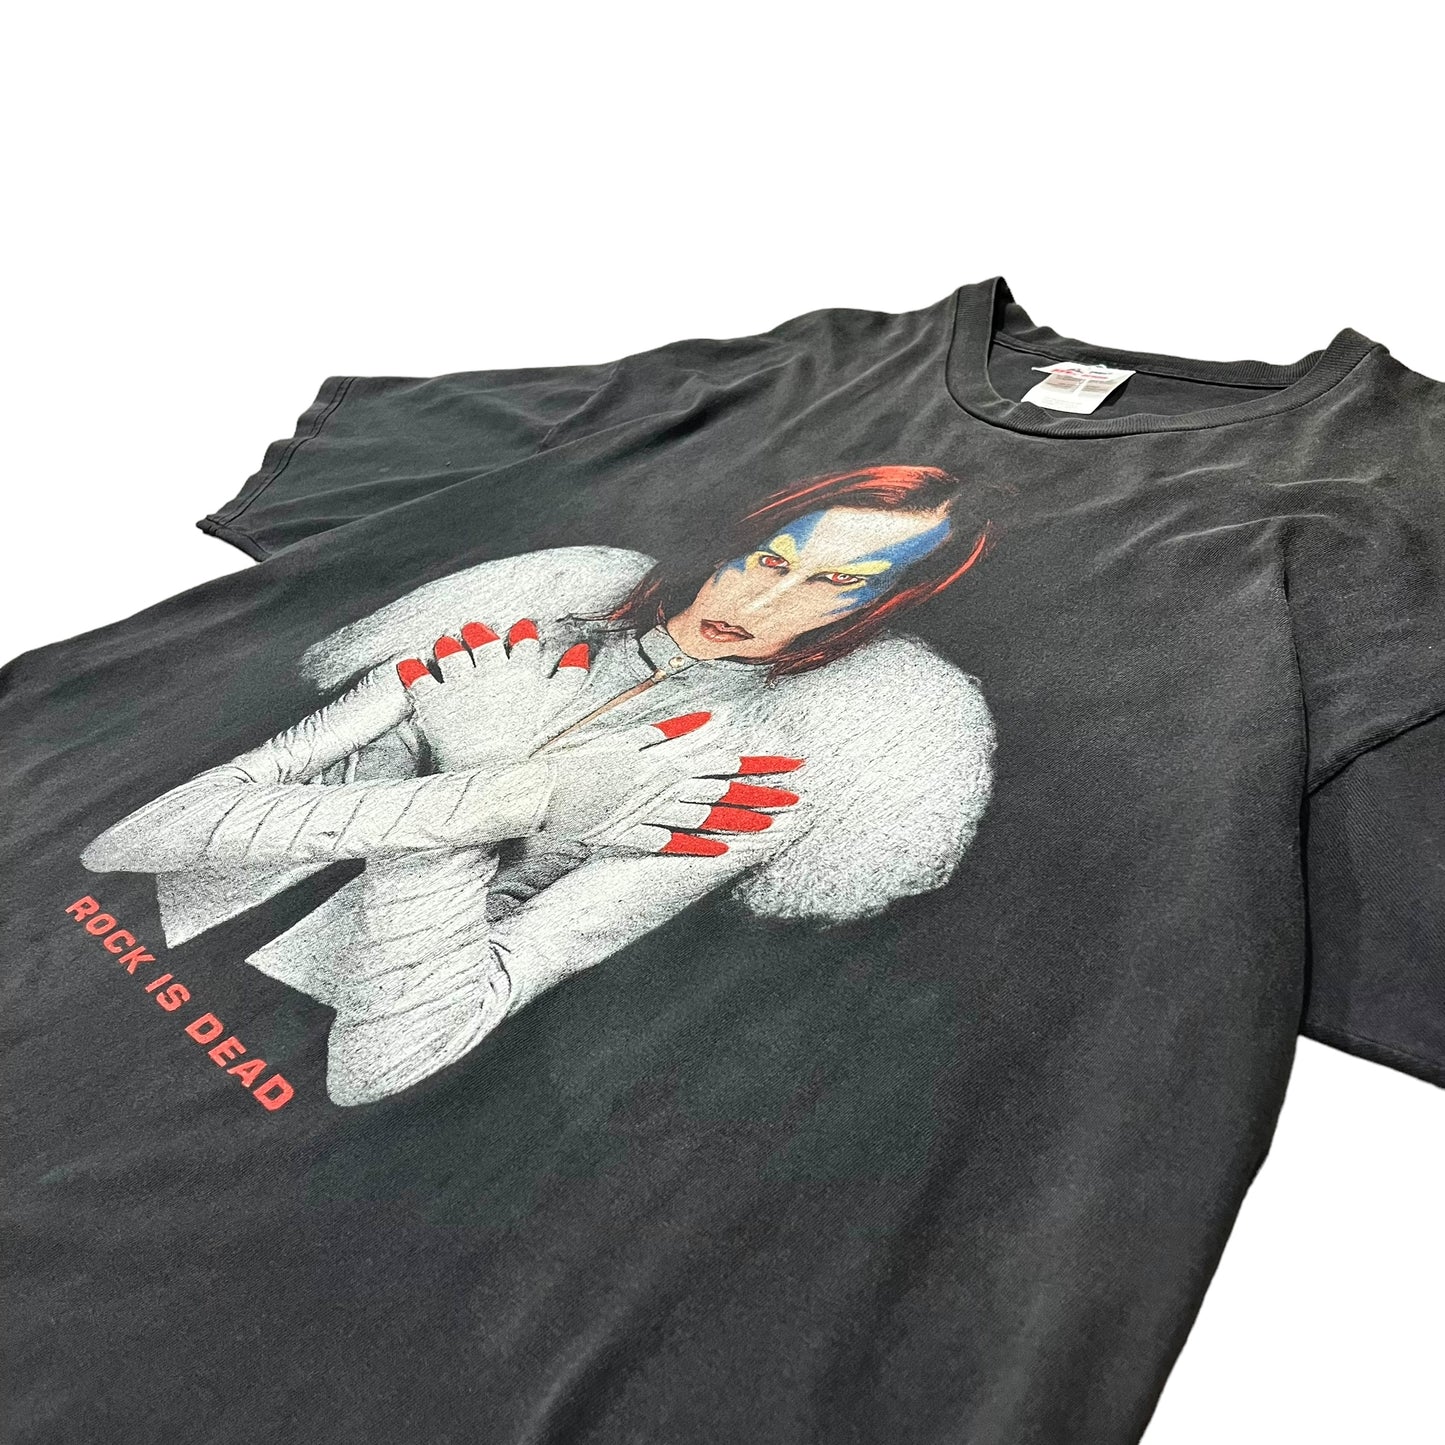 00’s Marilyn Manson
ROCK IS DEAD OMEGA AND THE MECHANICAL ANIMALS t-shirt